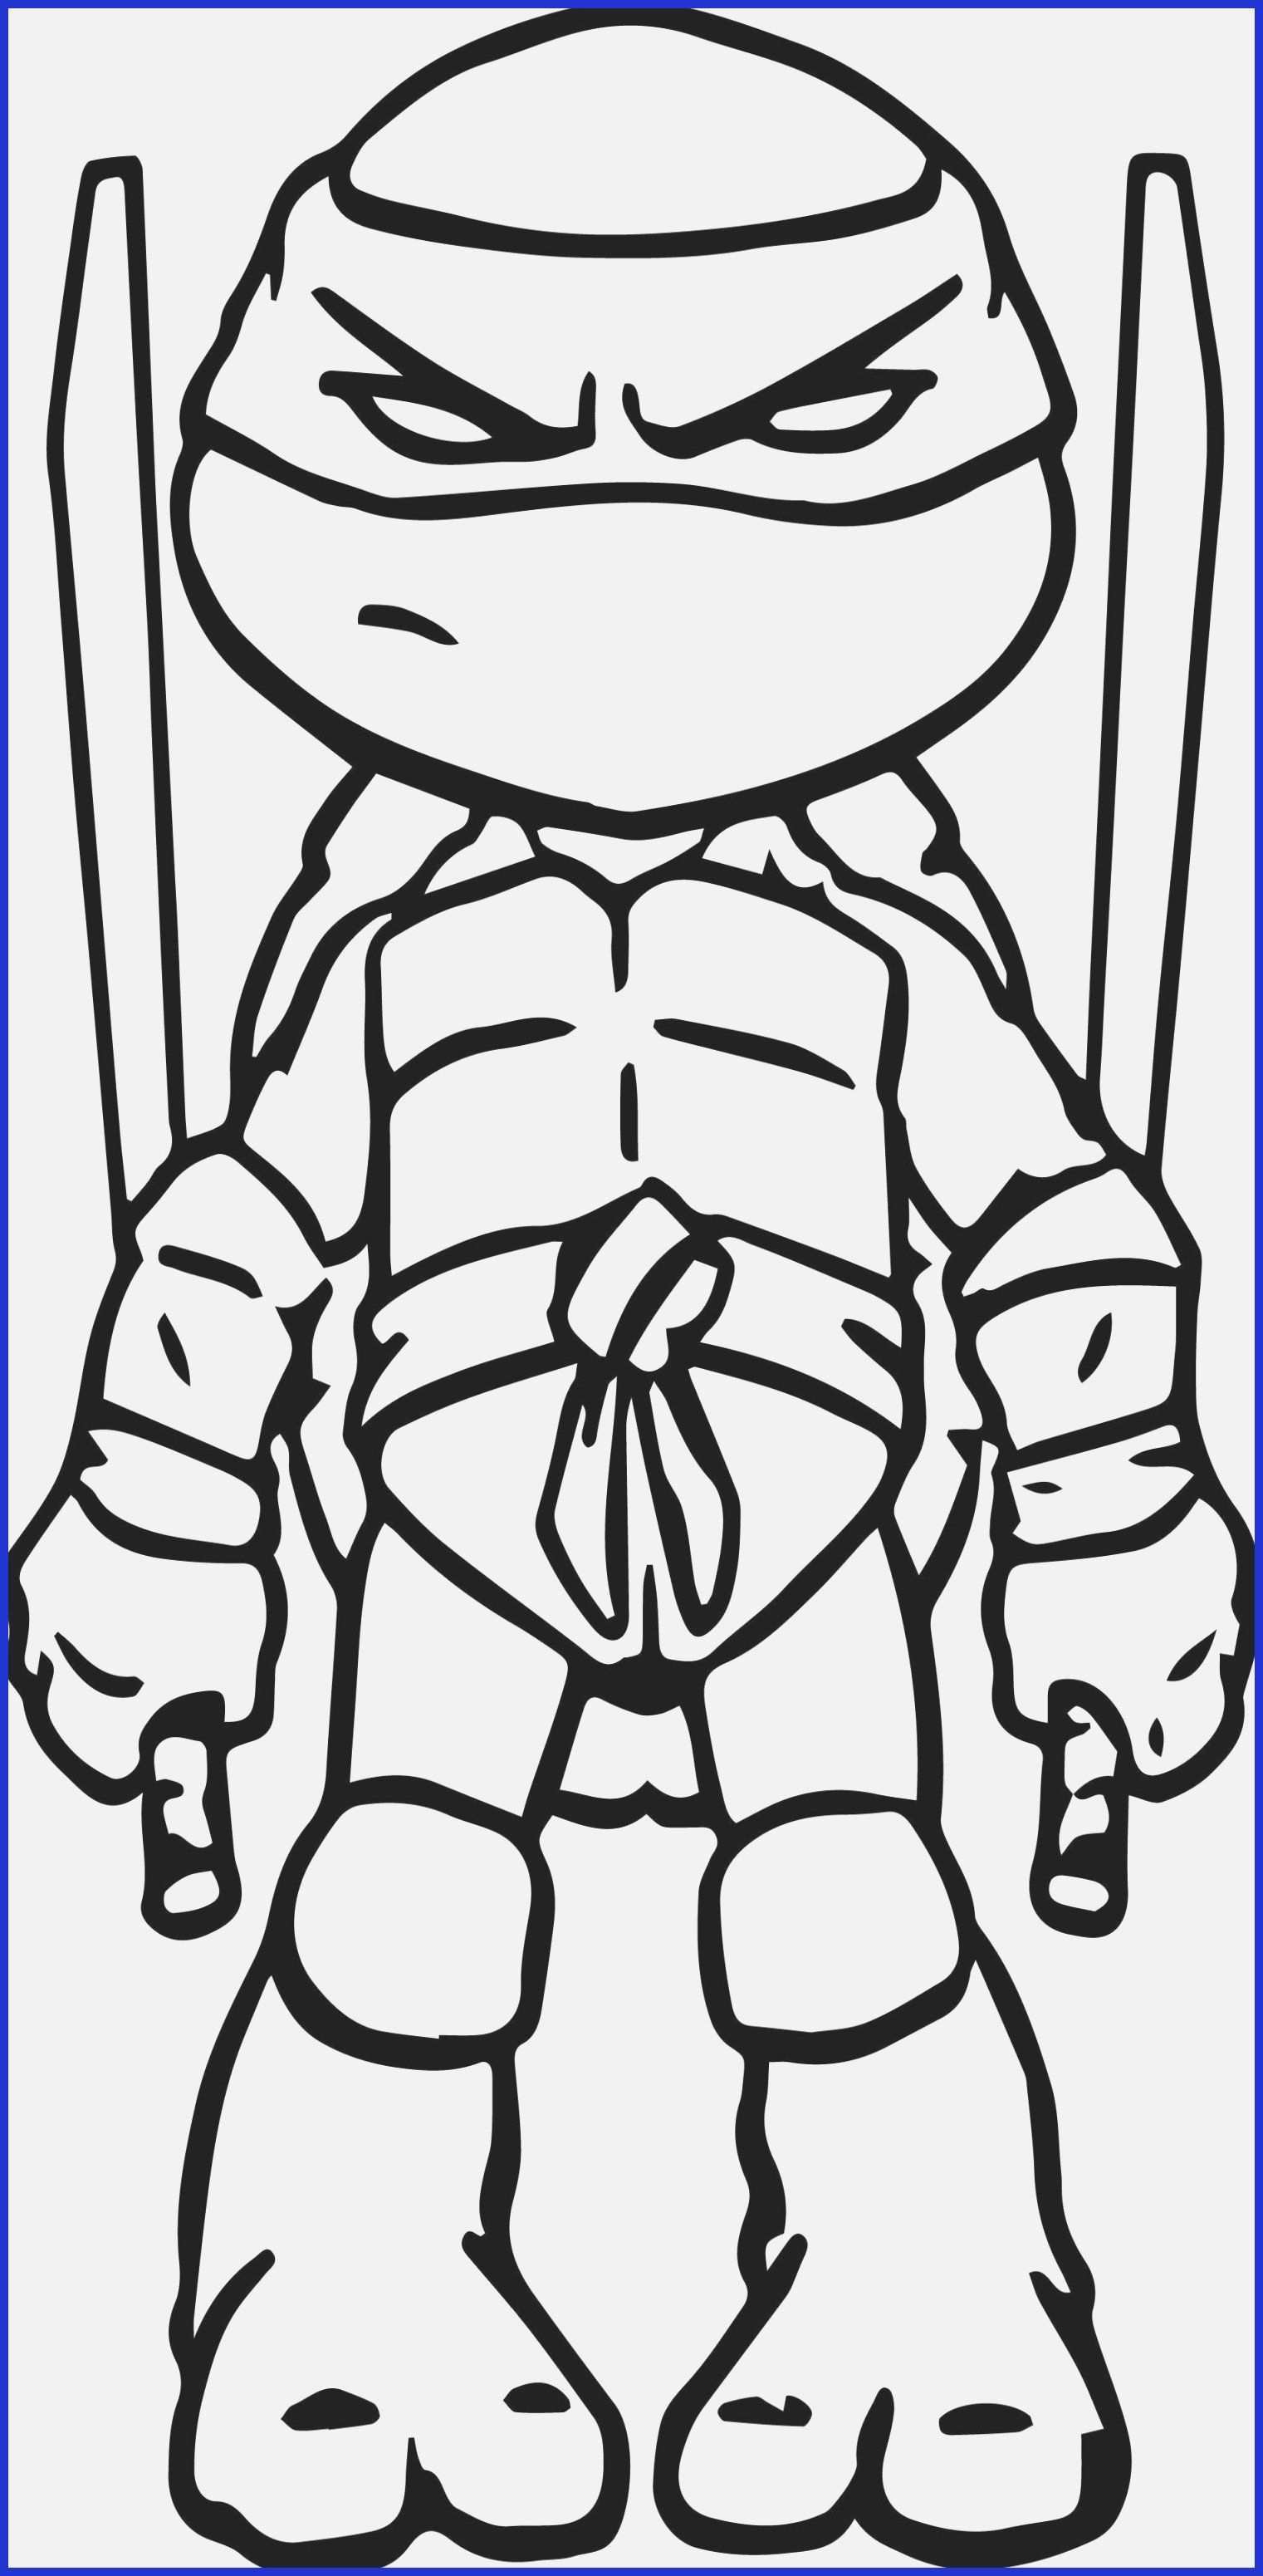 Ninja Turtles Coloring Pages Lovely 16 Ninja Turtle Halloween Coloring Pages Hallowee Ninja Turtle Coloring Pages Turtle Coloring Pages Cartoon Coloring Pages